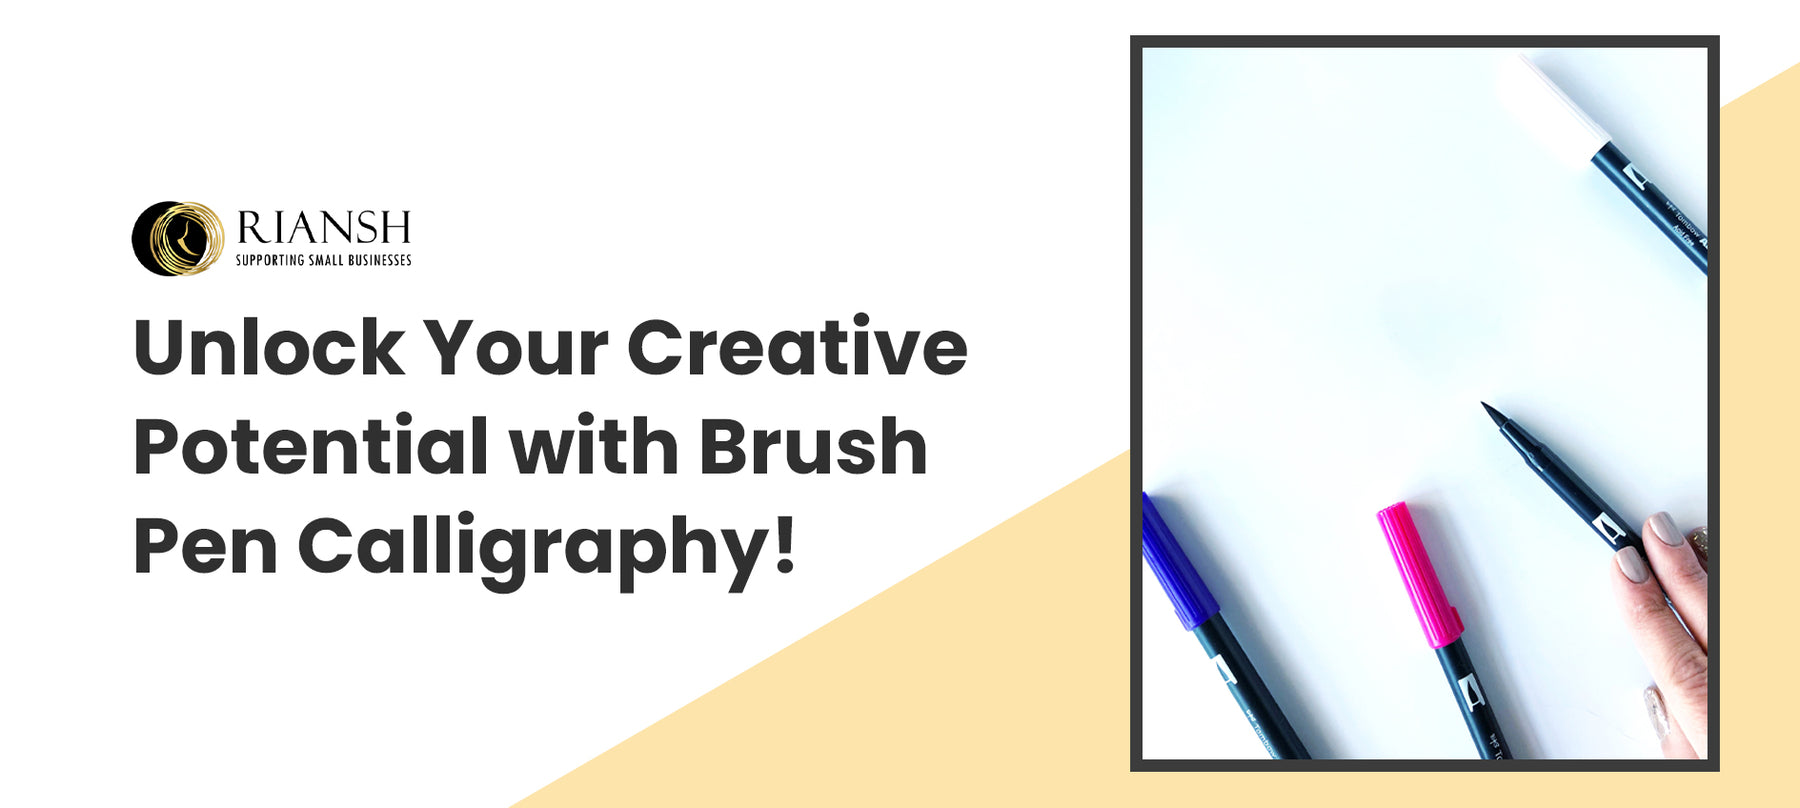 Unlock Your Creative Potential with Brush Pen Calligraphy!